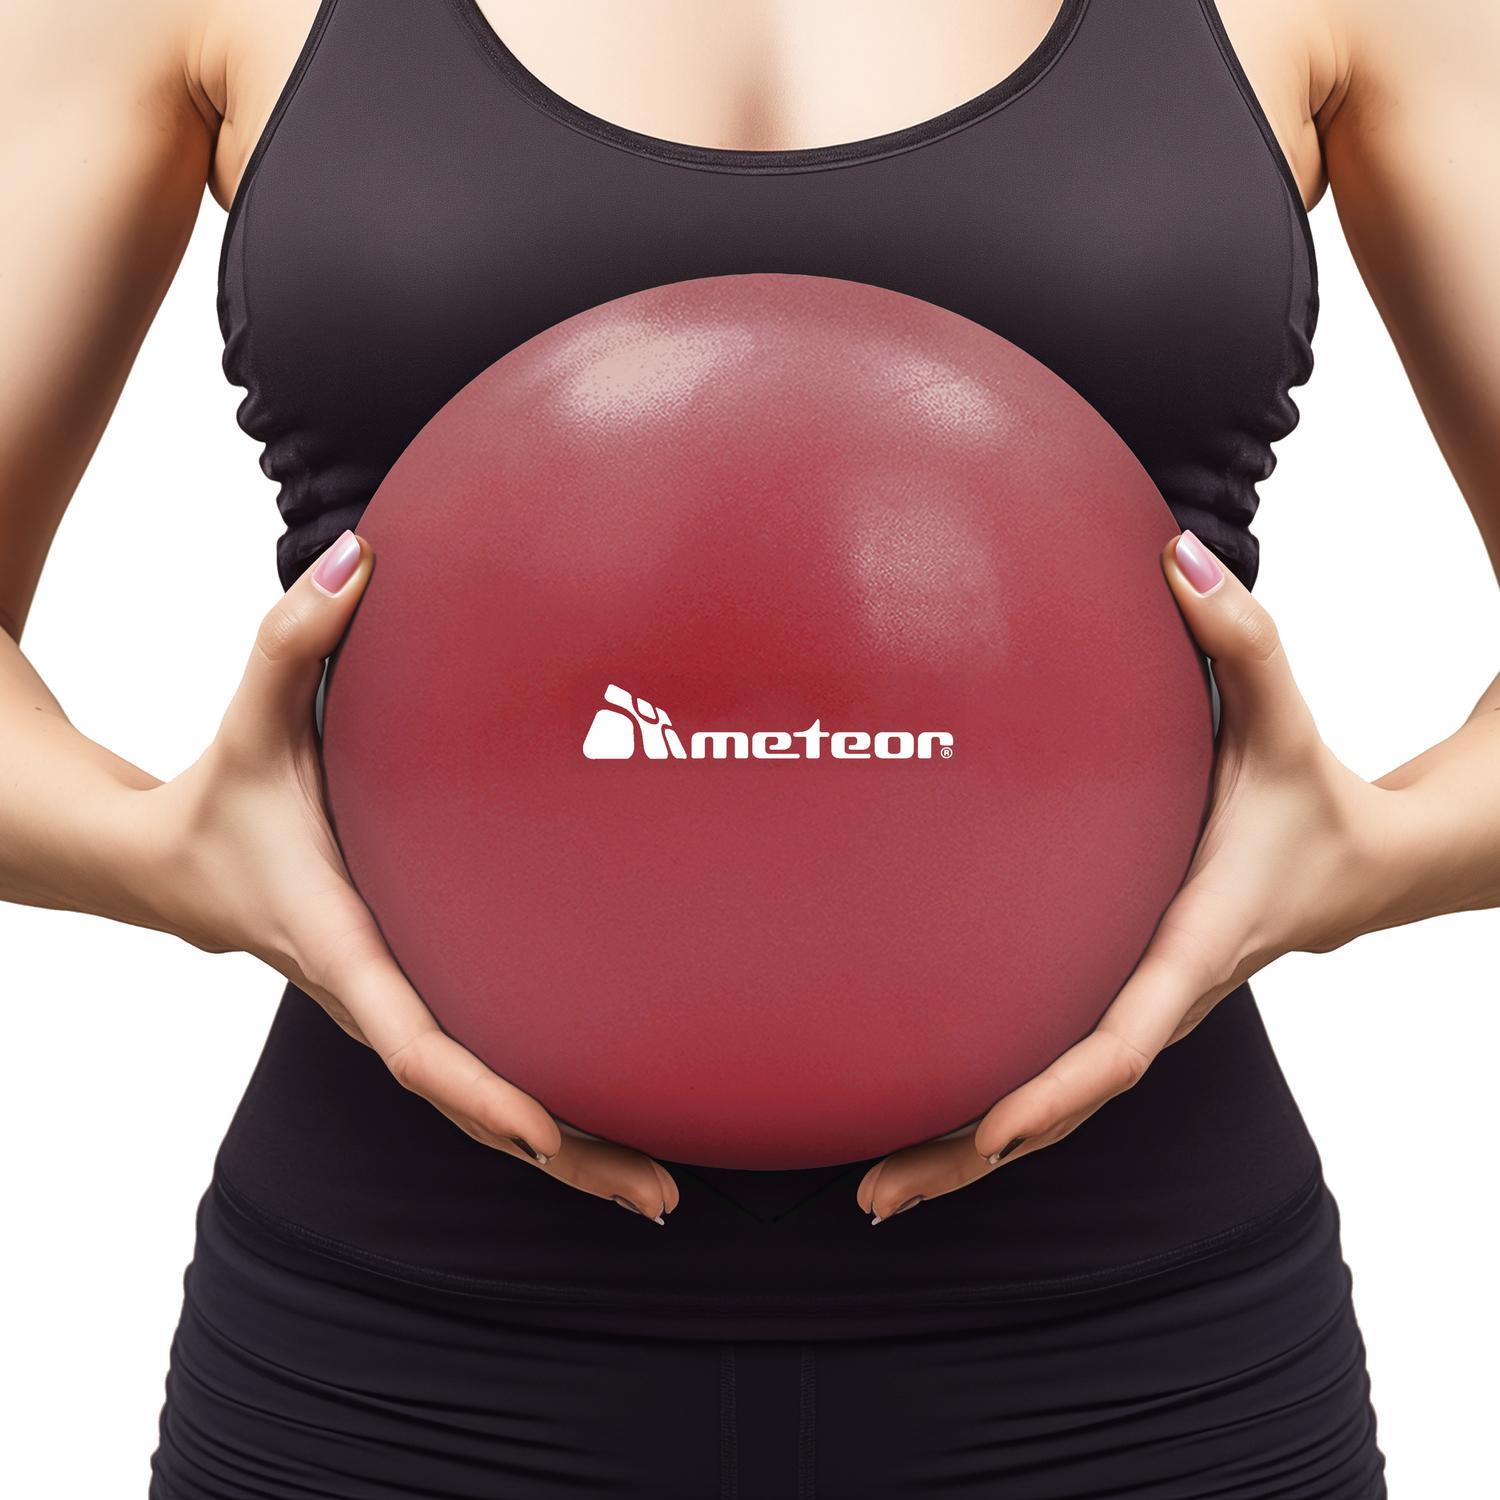 METEOR 20CM Anti-Burst Yoga Ball,Swiss Ball,Pilates Ball for Exercise,Yoga,Pilates,Physio Therapy,Rehab,Office - Red x1PC